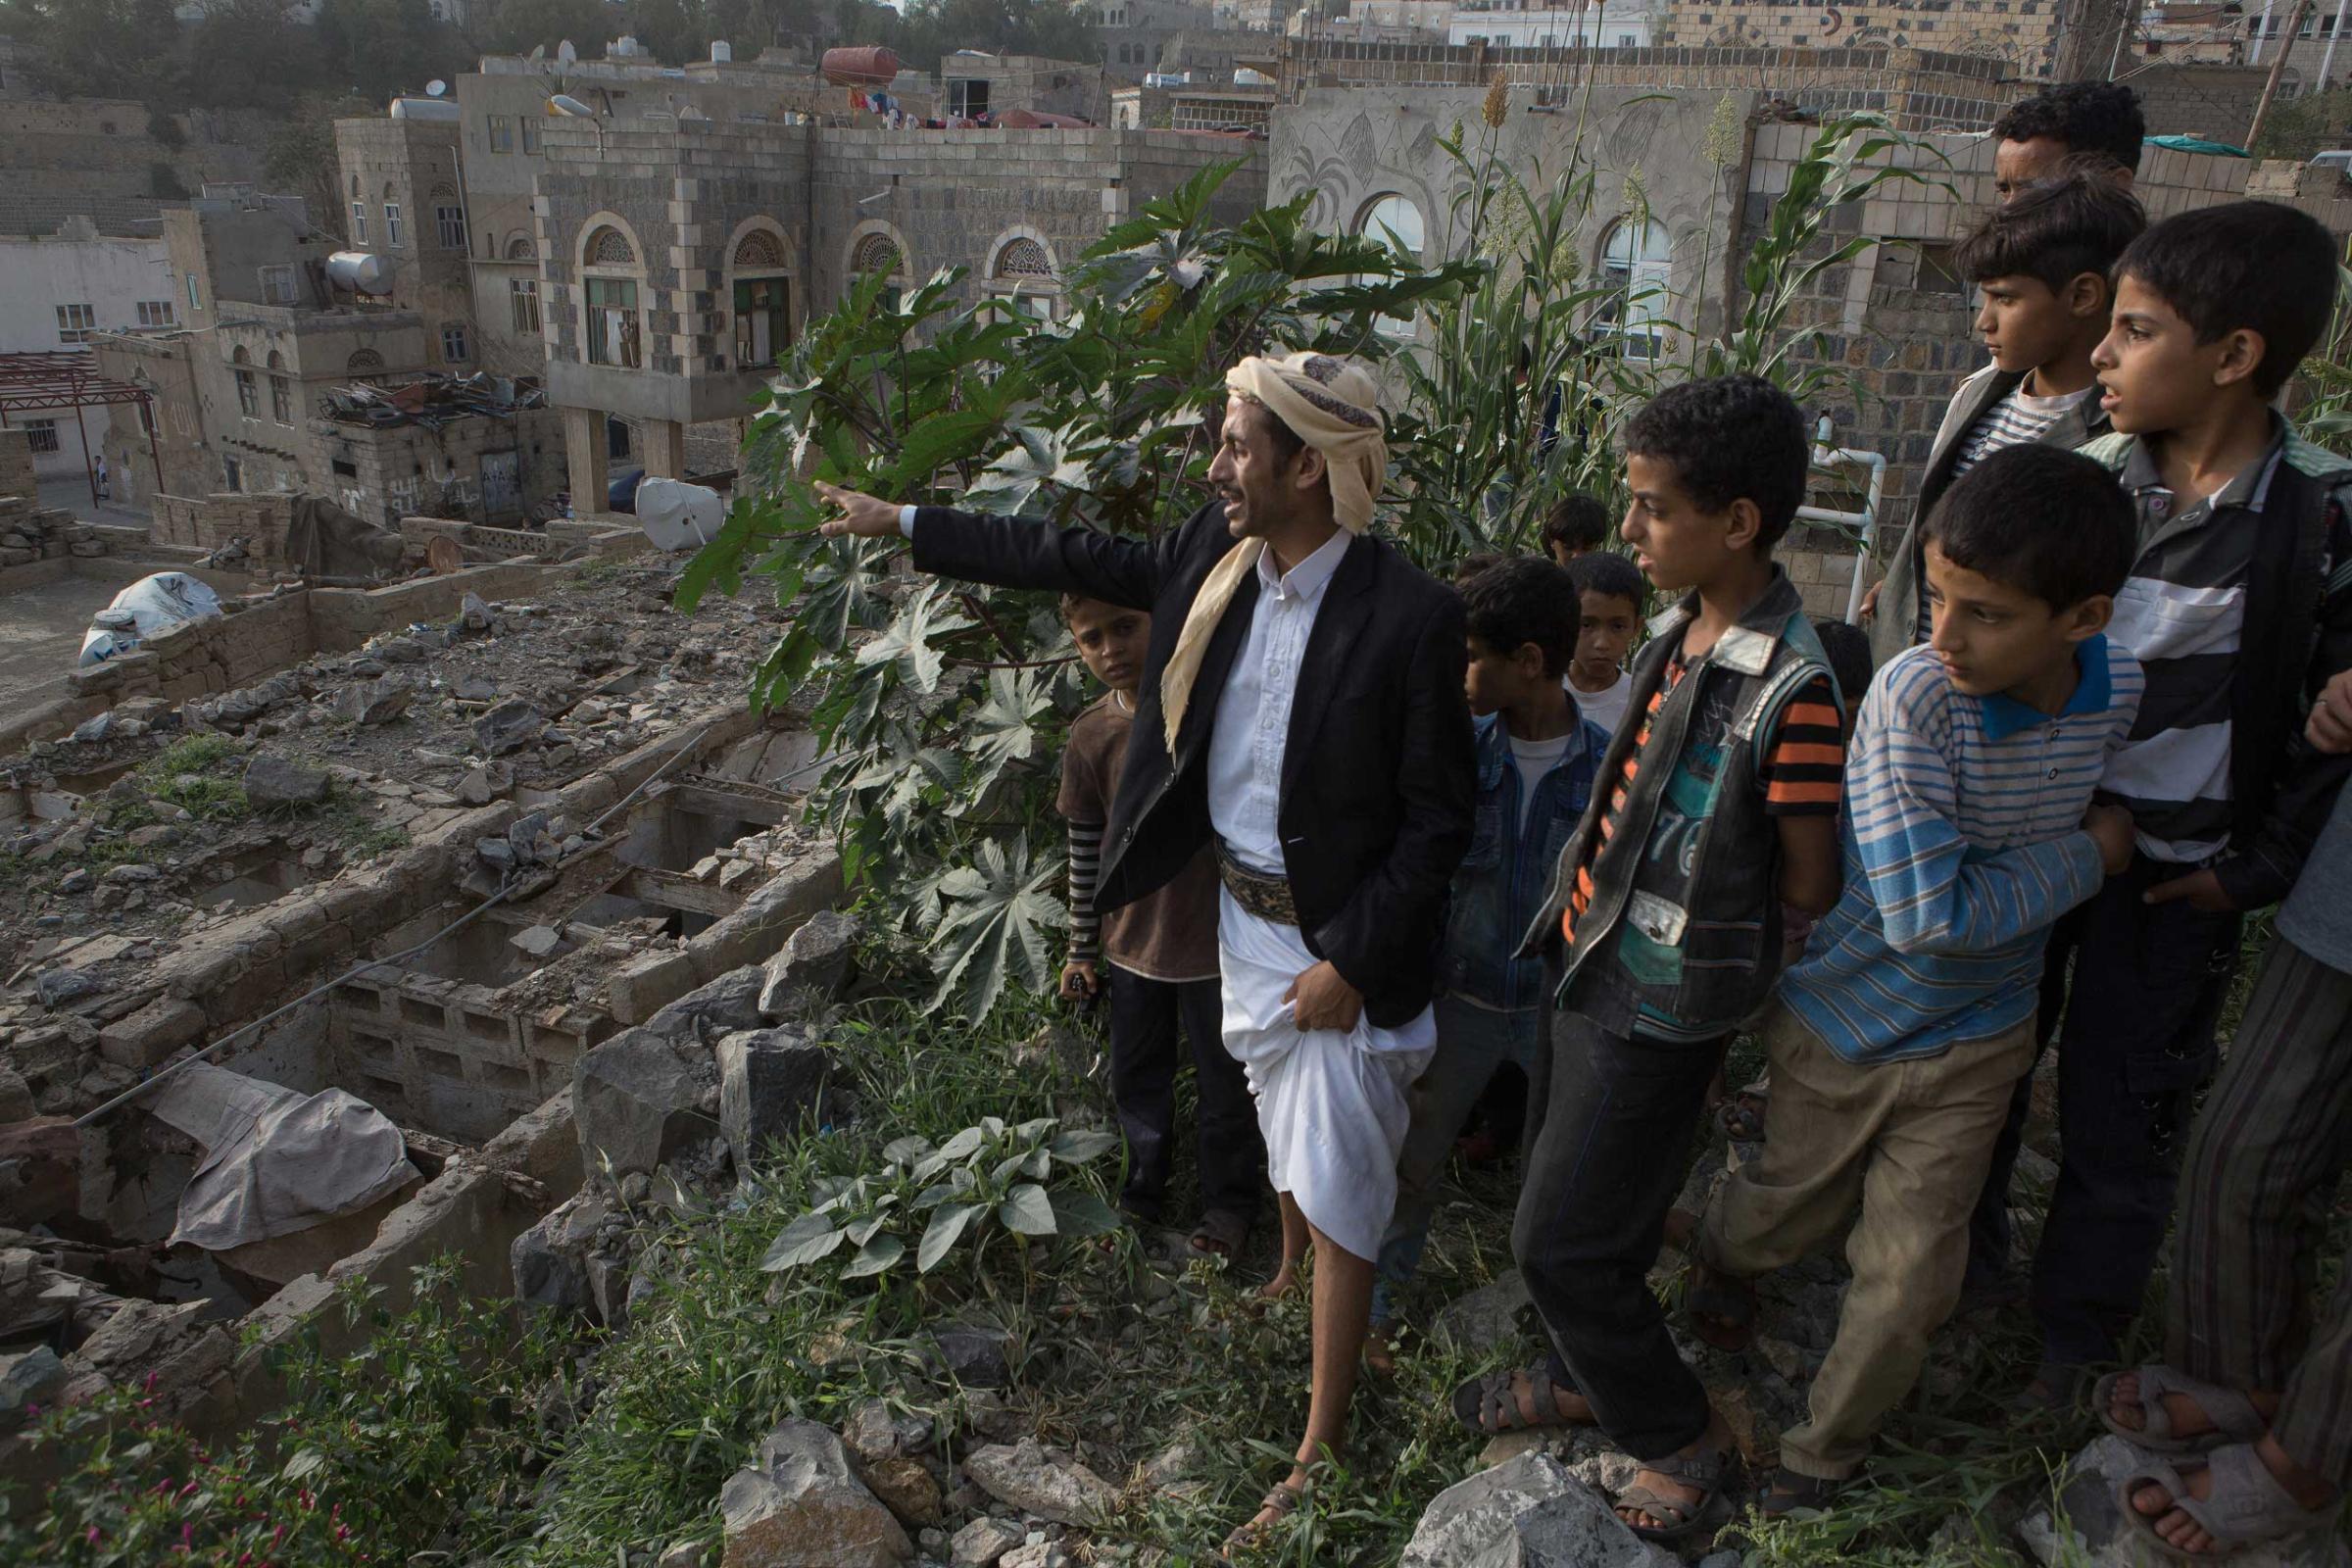 Locals show the destroyed civilian area near a military compound in Hajjah city, which was hit by an airstrike on May, 31 2015 causing 5 civilian casualties.